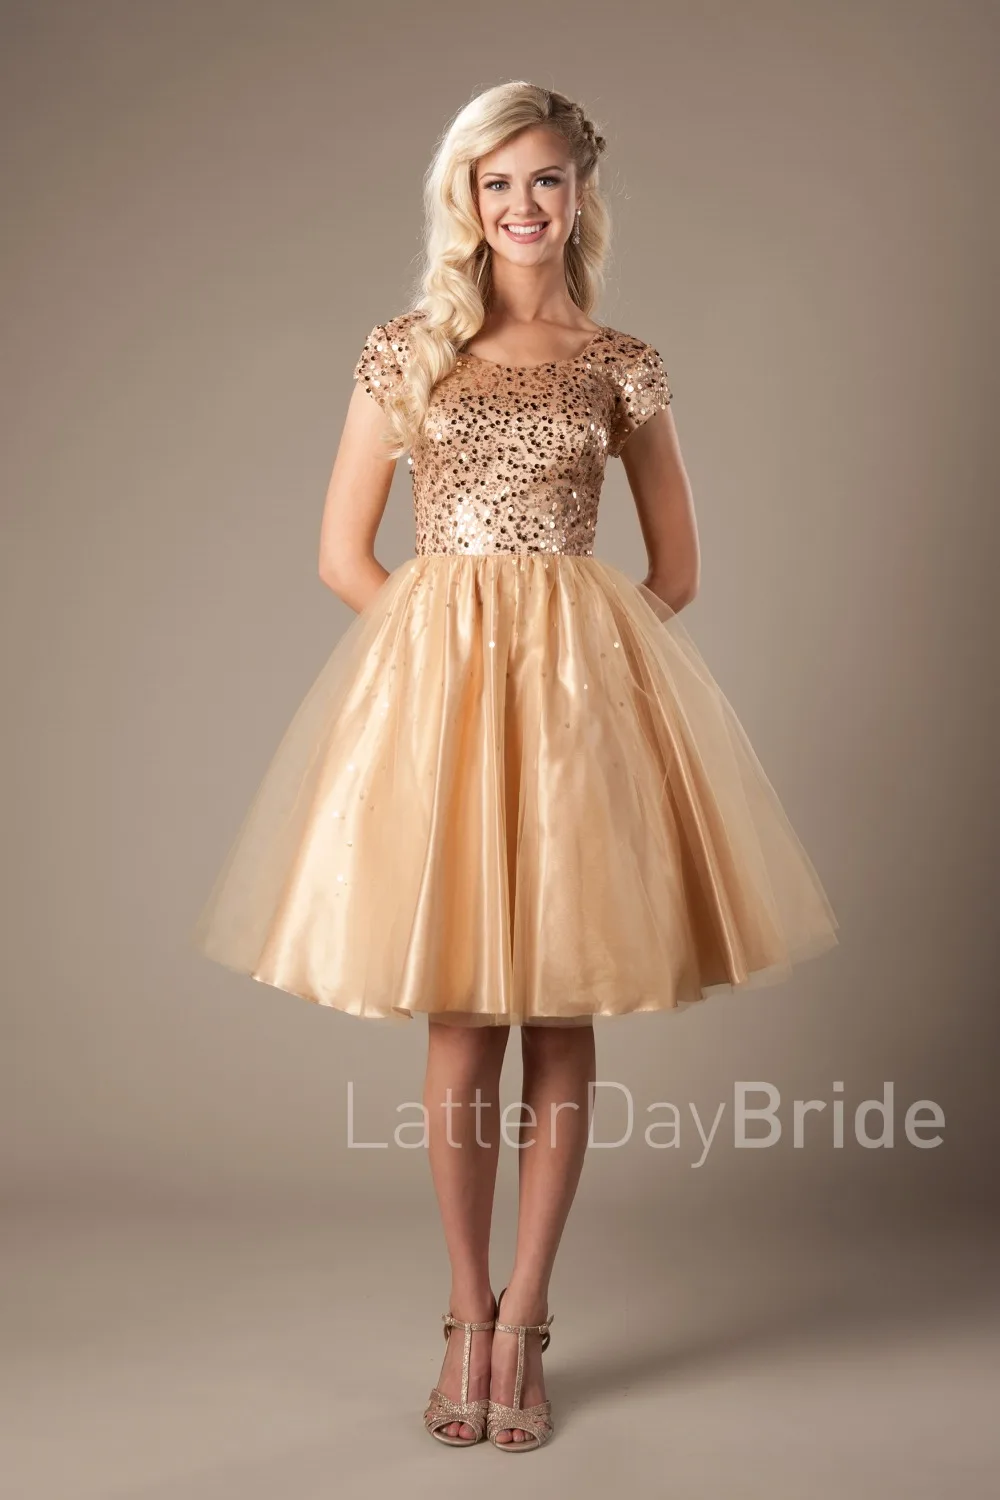 Cap sleeve sequin and tulle dress